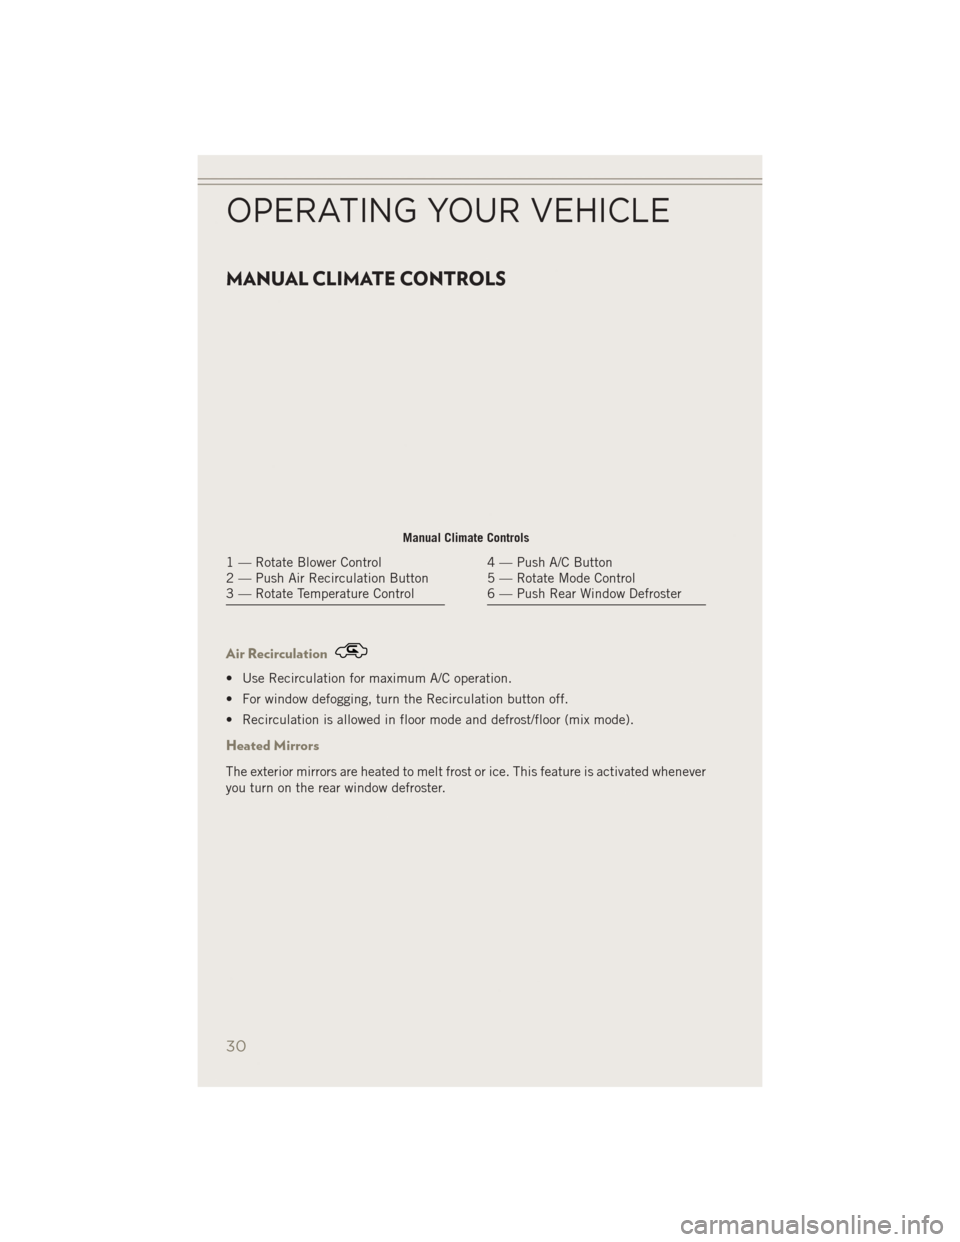 JEEP PATRIOT 2014 1.G Owners Guide MANUAL CLIMATE CONTROLS
Air Recirculation
• Use Recirculation for maximum A/C operation.
• For window defogging, turn the Recirculation button off.
• Recirculation is allowed in floor mode and d